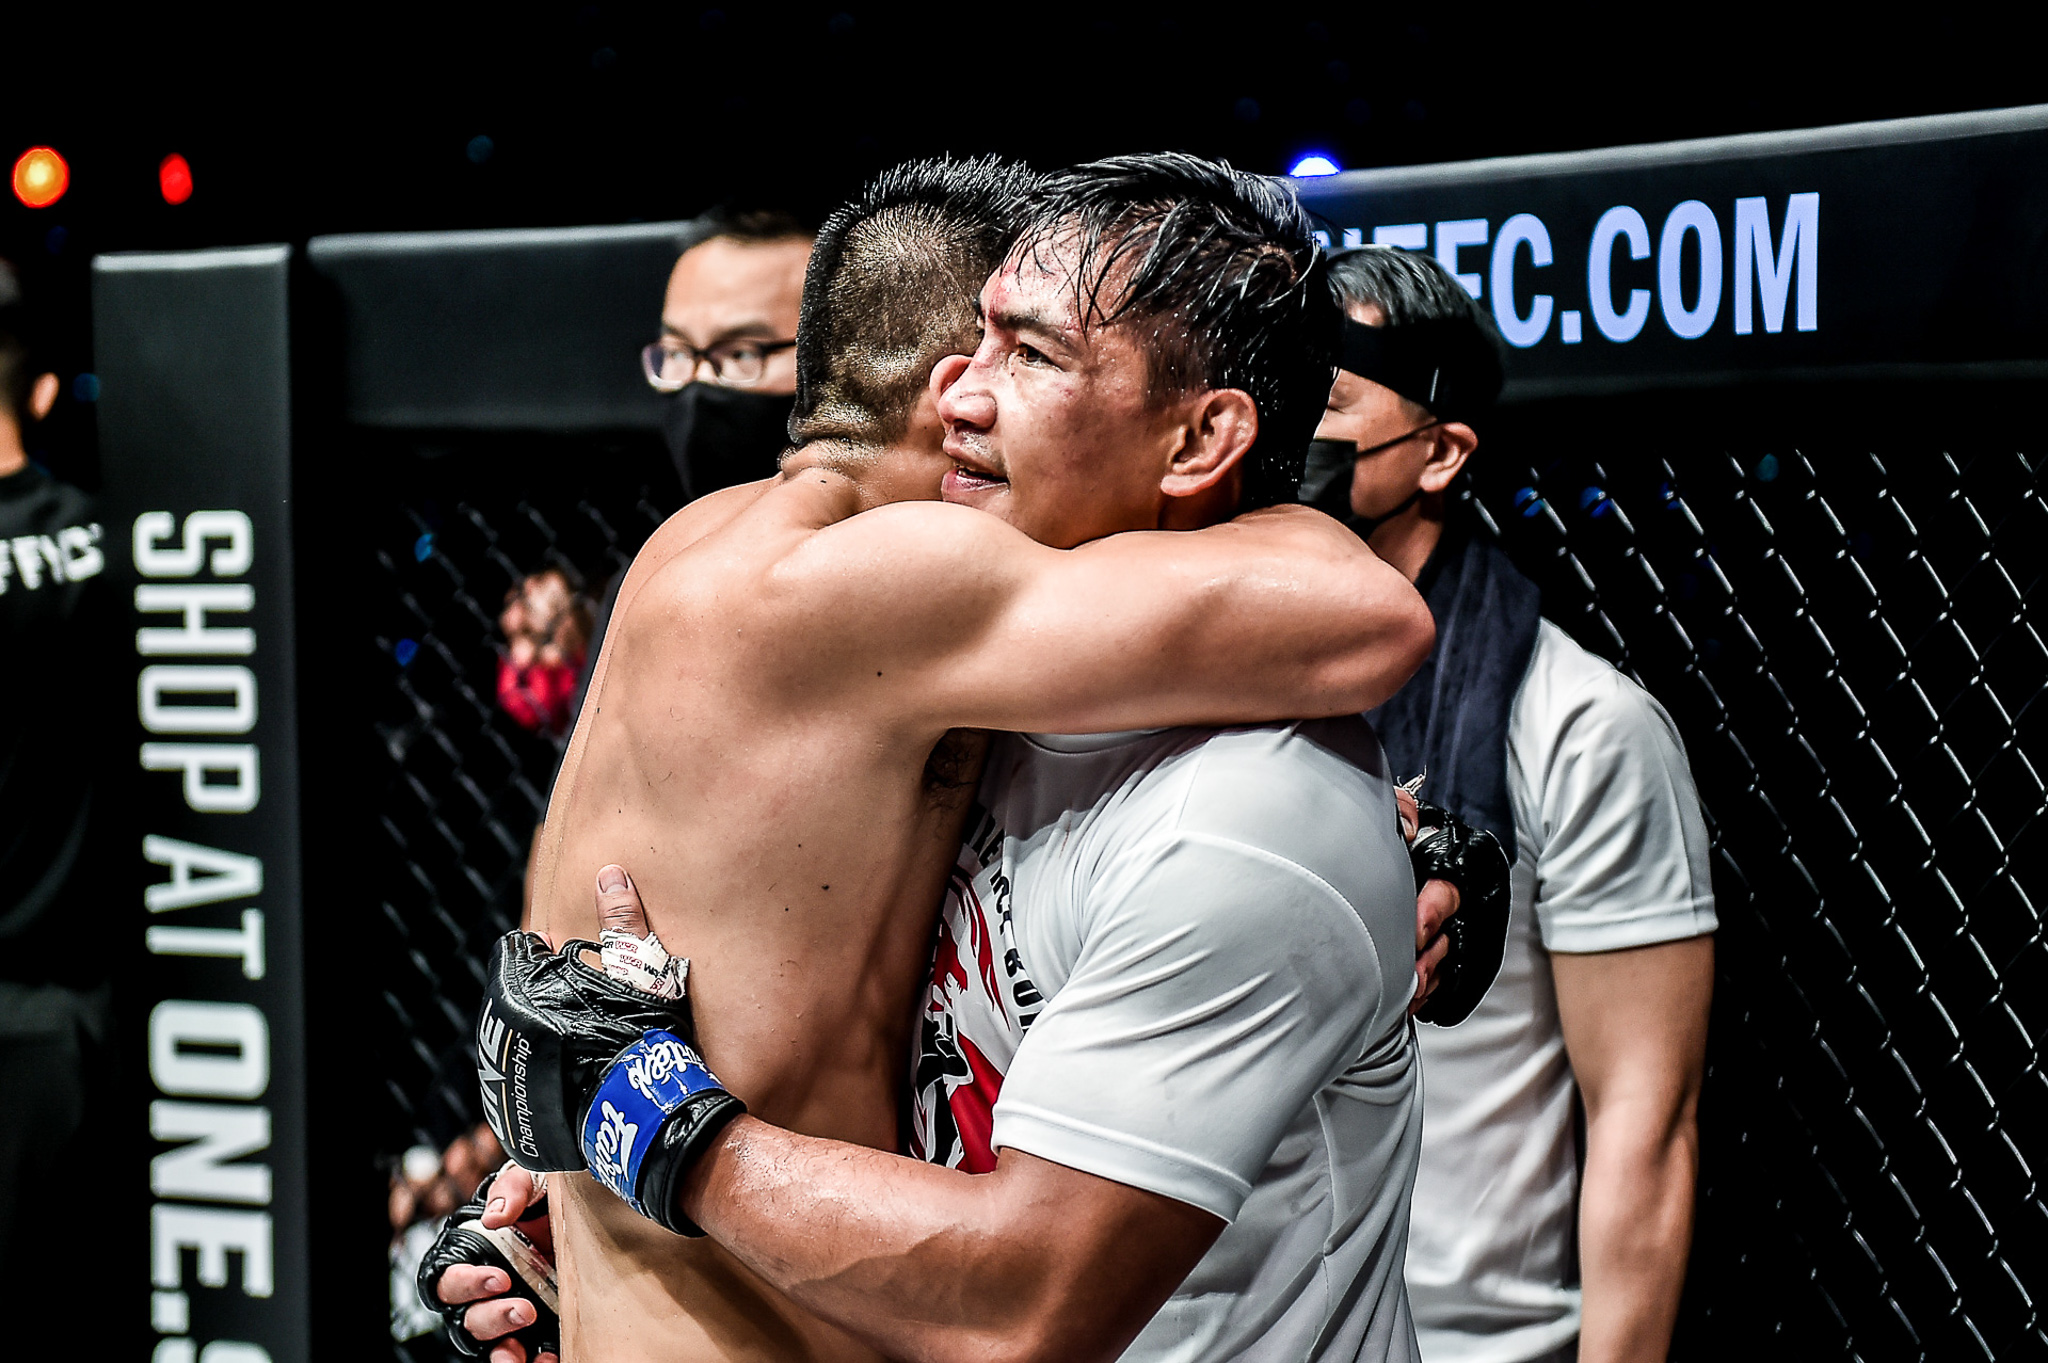 Folayang inspired by Hidilyn's perseverance to keep going